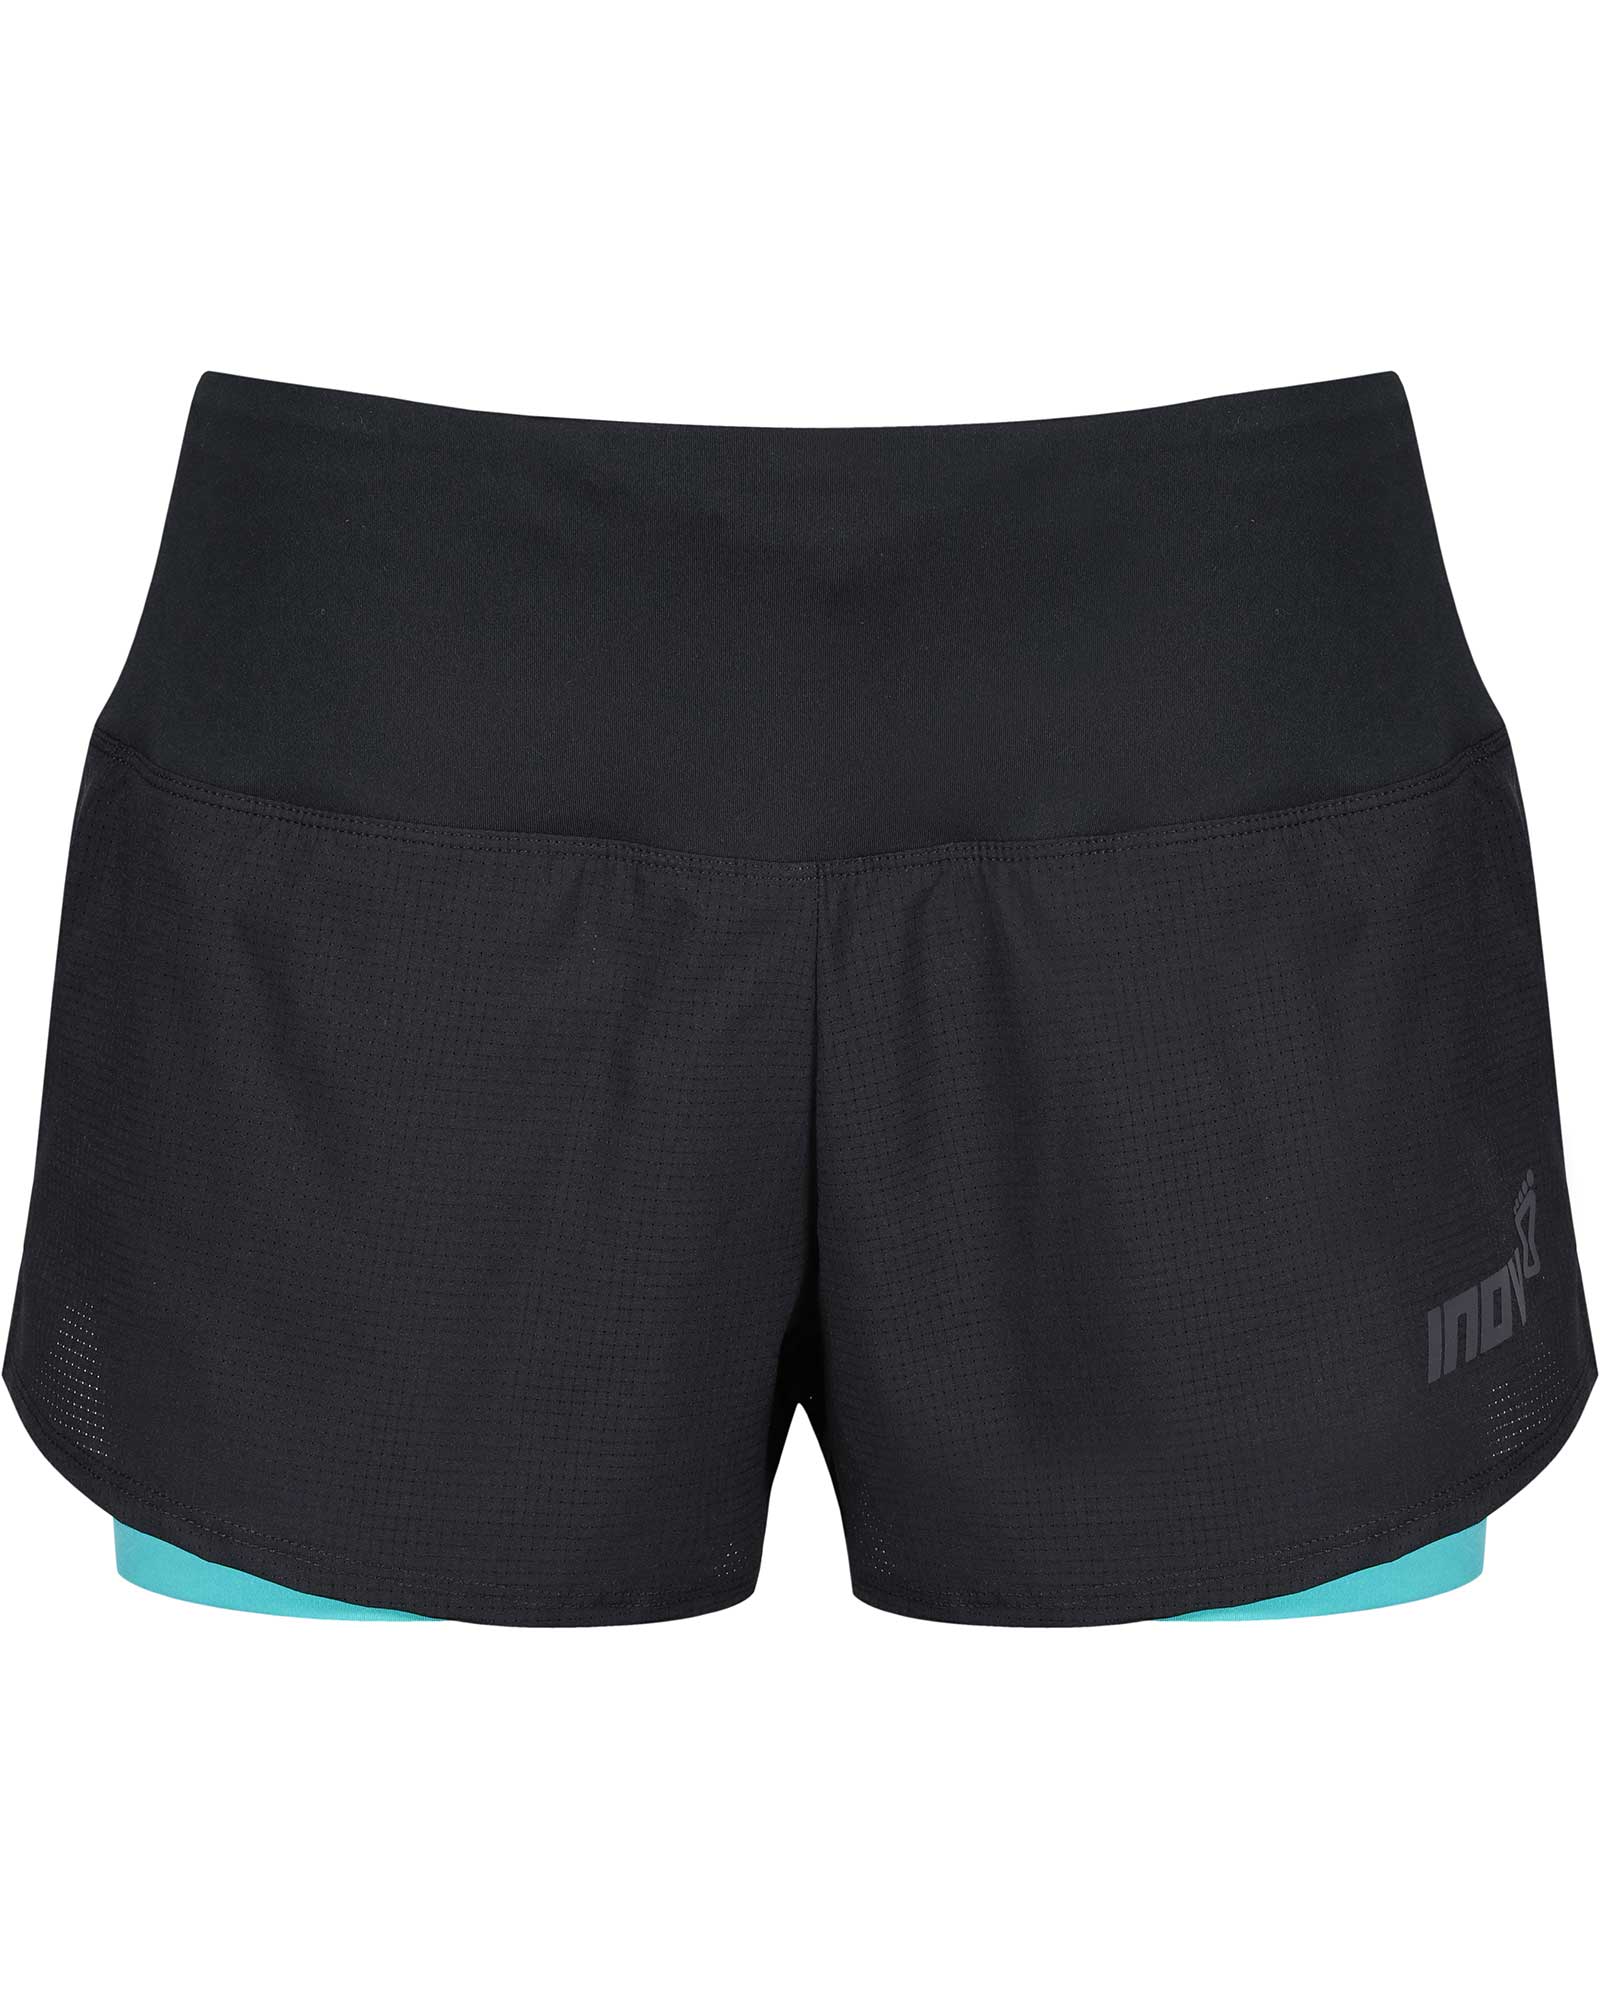 Product image of Inov-8 TrailFly Ultra Women's 3 2in1 Shorts